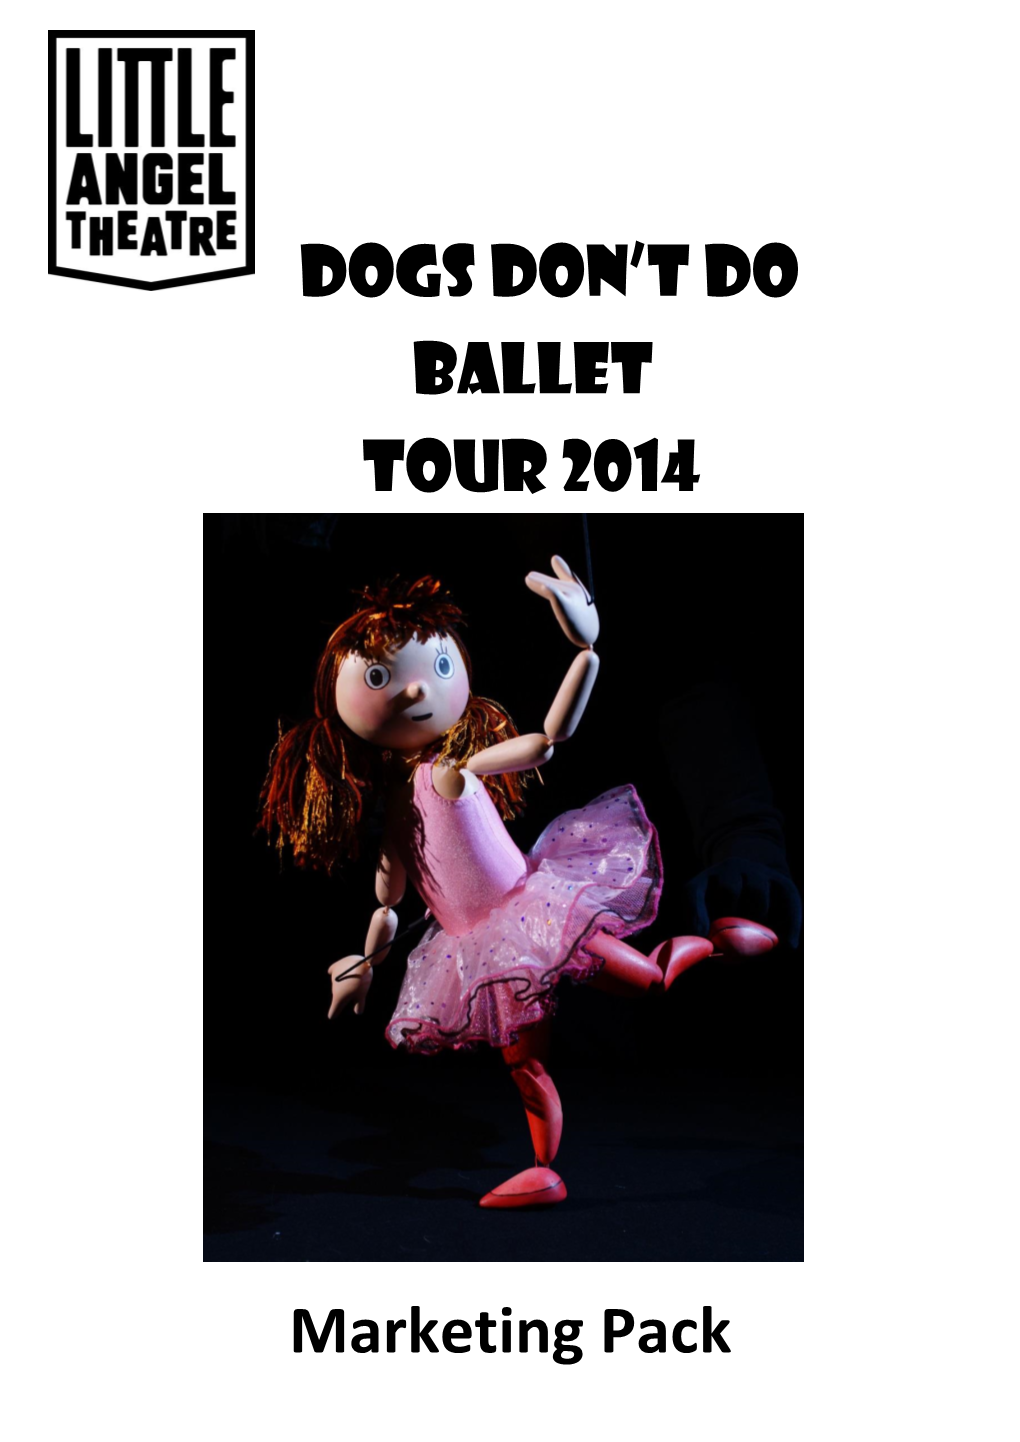 Dogs Don't Do Ballet Tour 2014 Marketing Pack